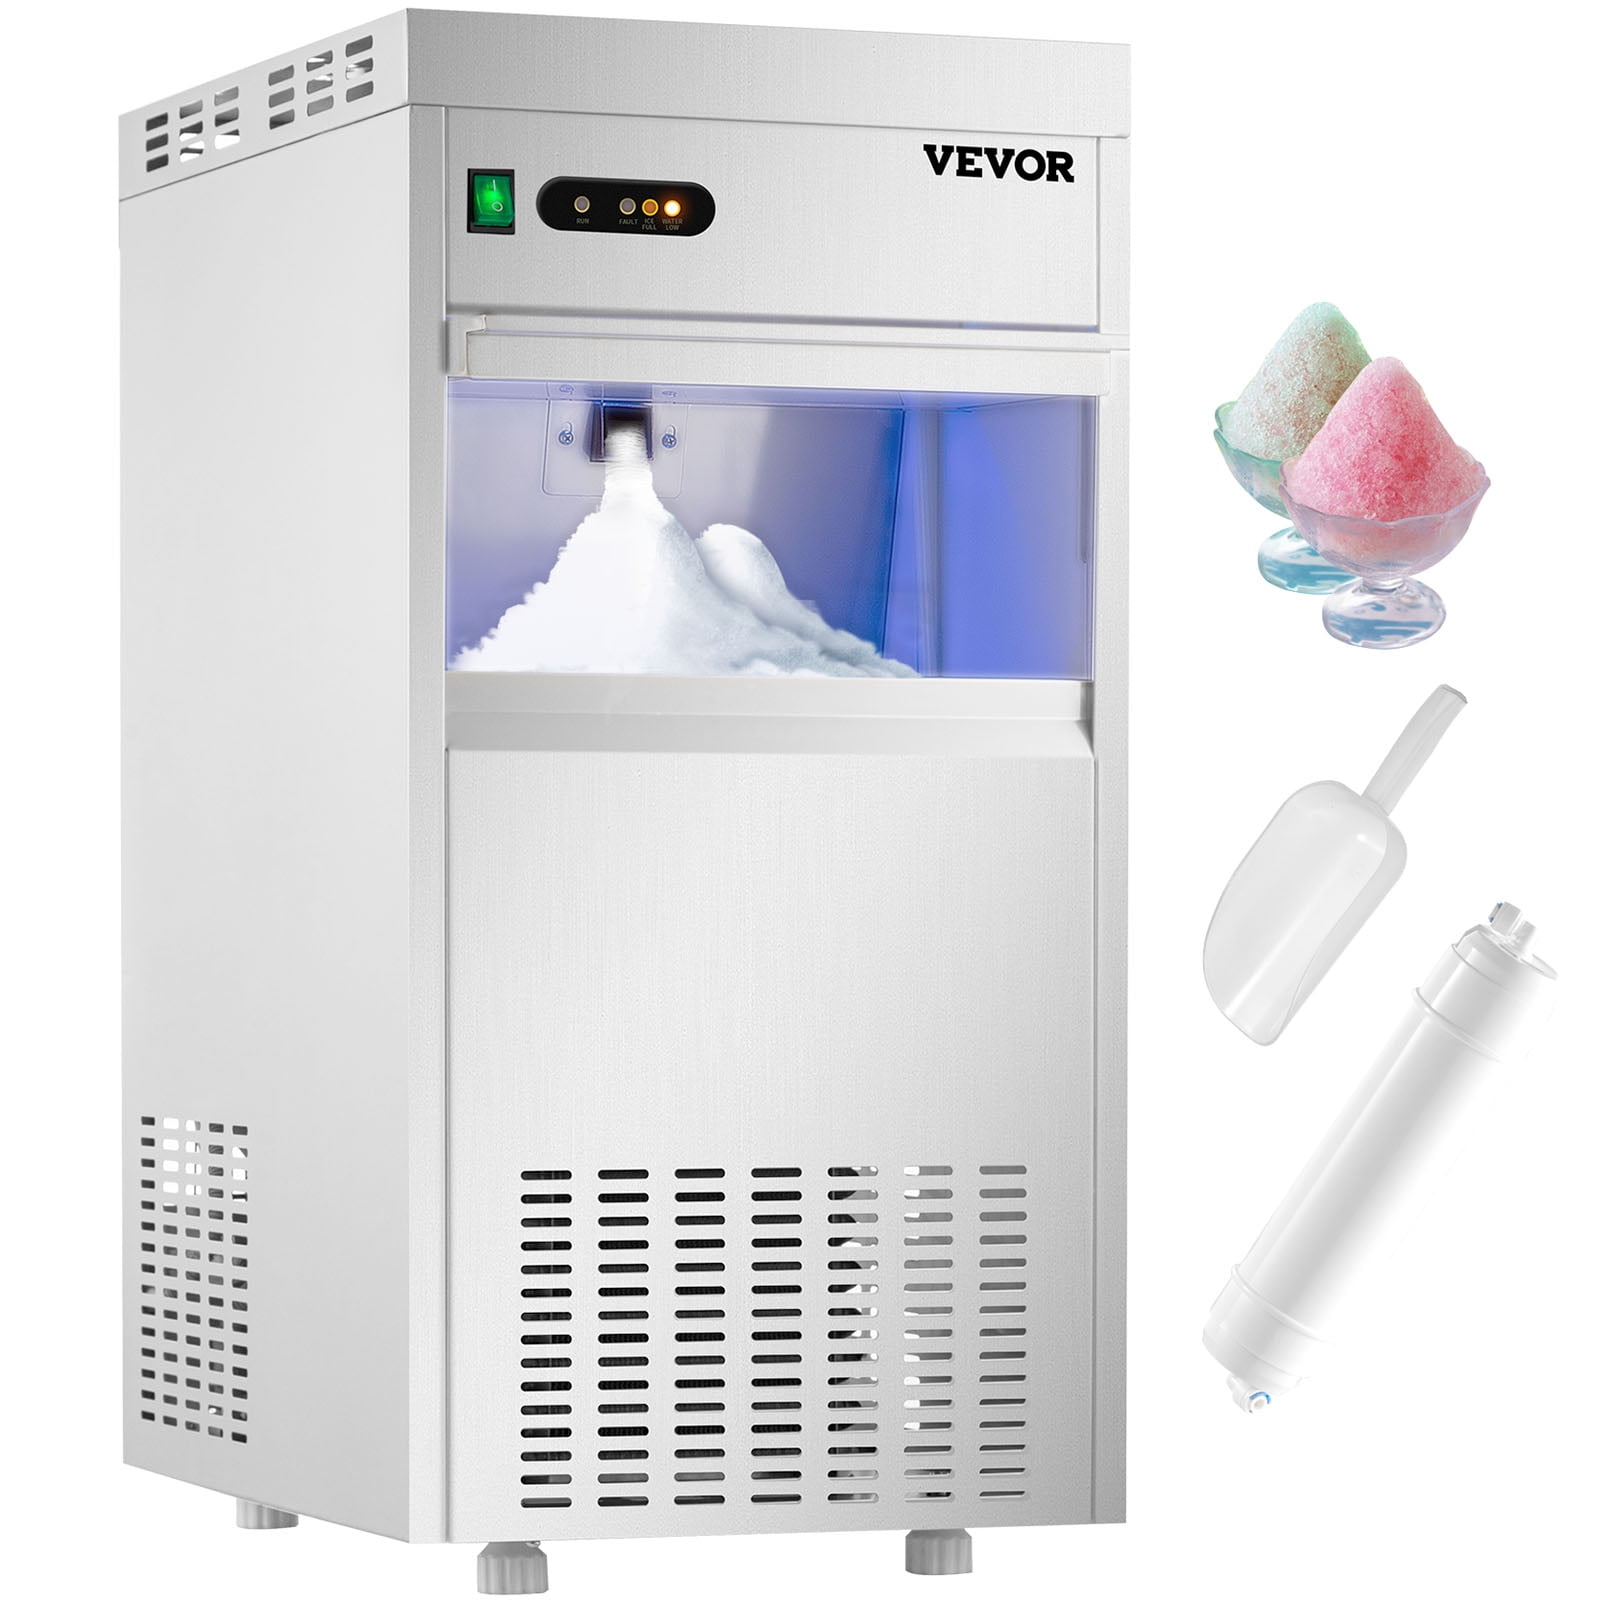 Vevor 110v Commercial Snowflake Ice Maker 2lbs 24h Etl Approved Food Grade Stainless Steel Construction Automatic Operation Freeatanding Water Filter And Spoon Perfect For Seafood Restaurant Walmart Com